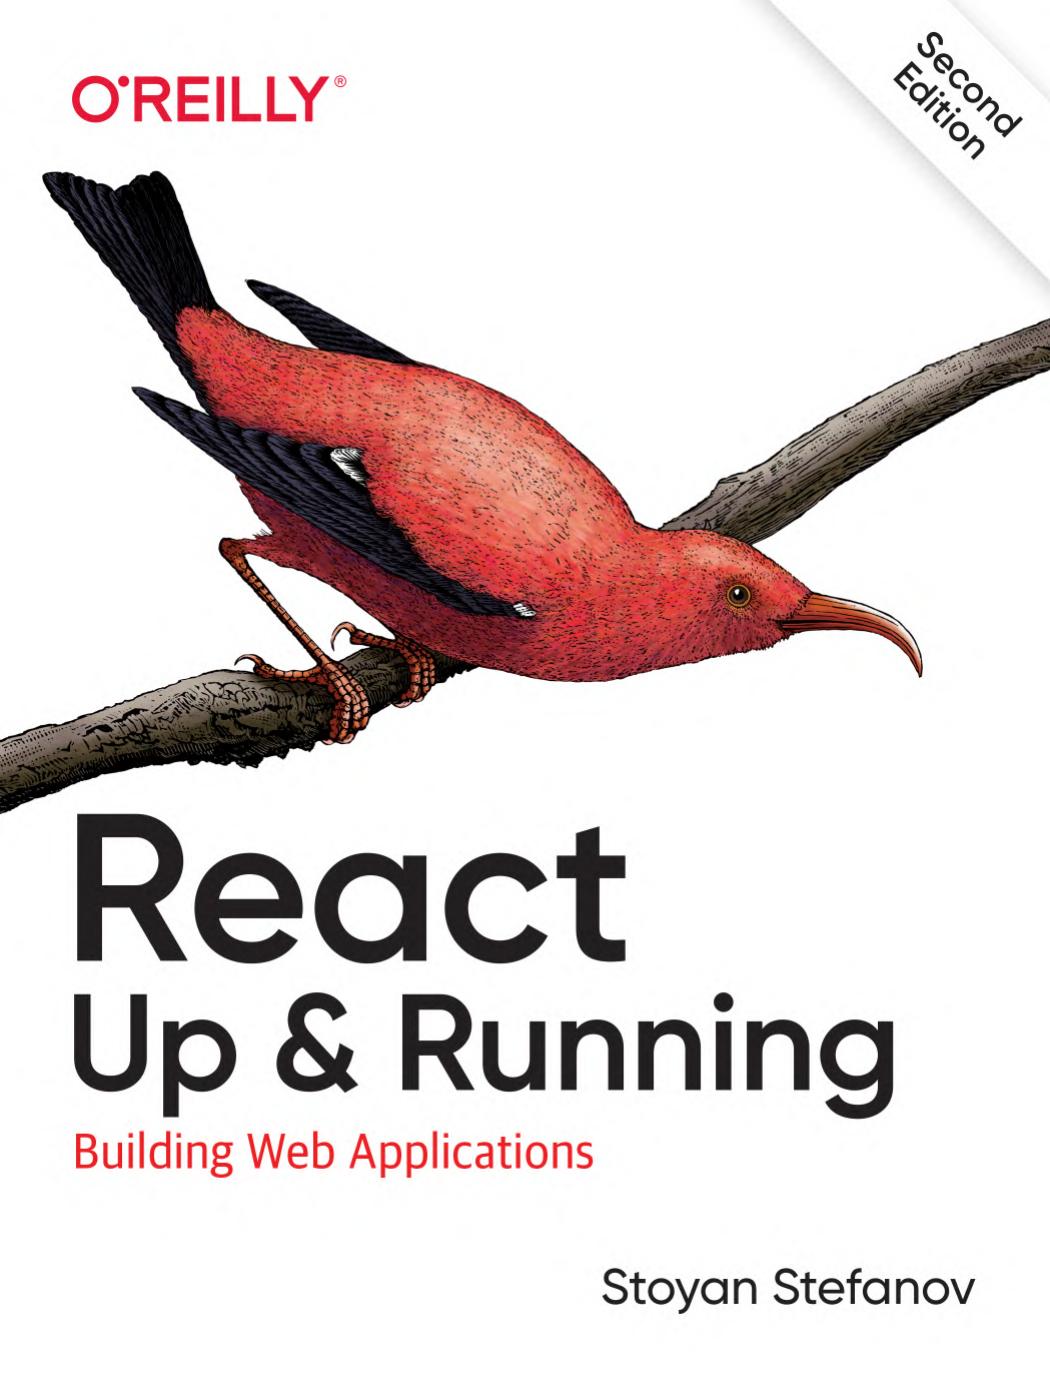 S. Stefanov - React. Up & Running. Building Web Applications (2nd Edition)